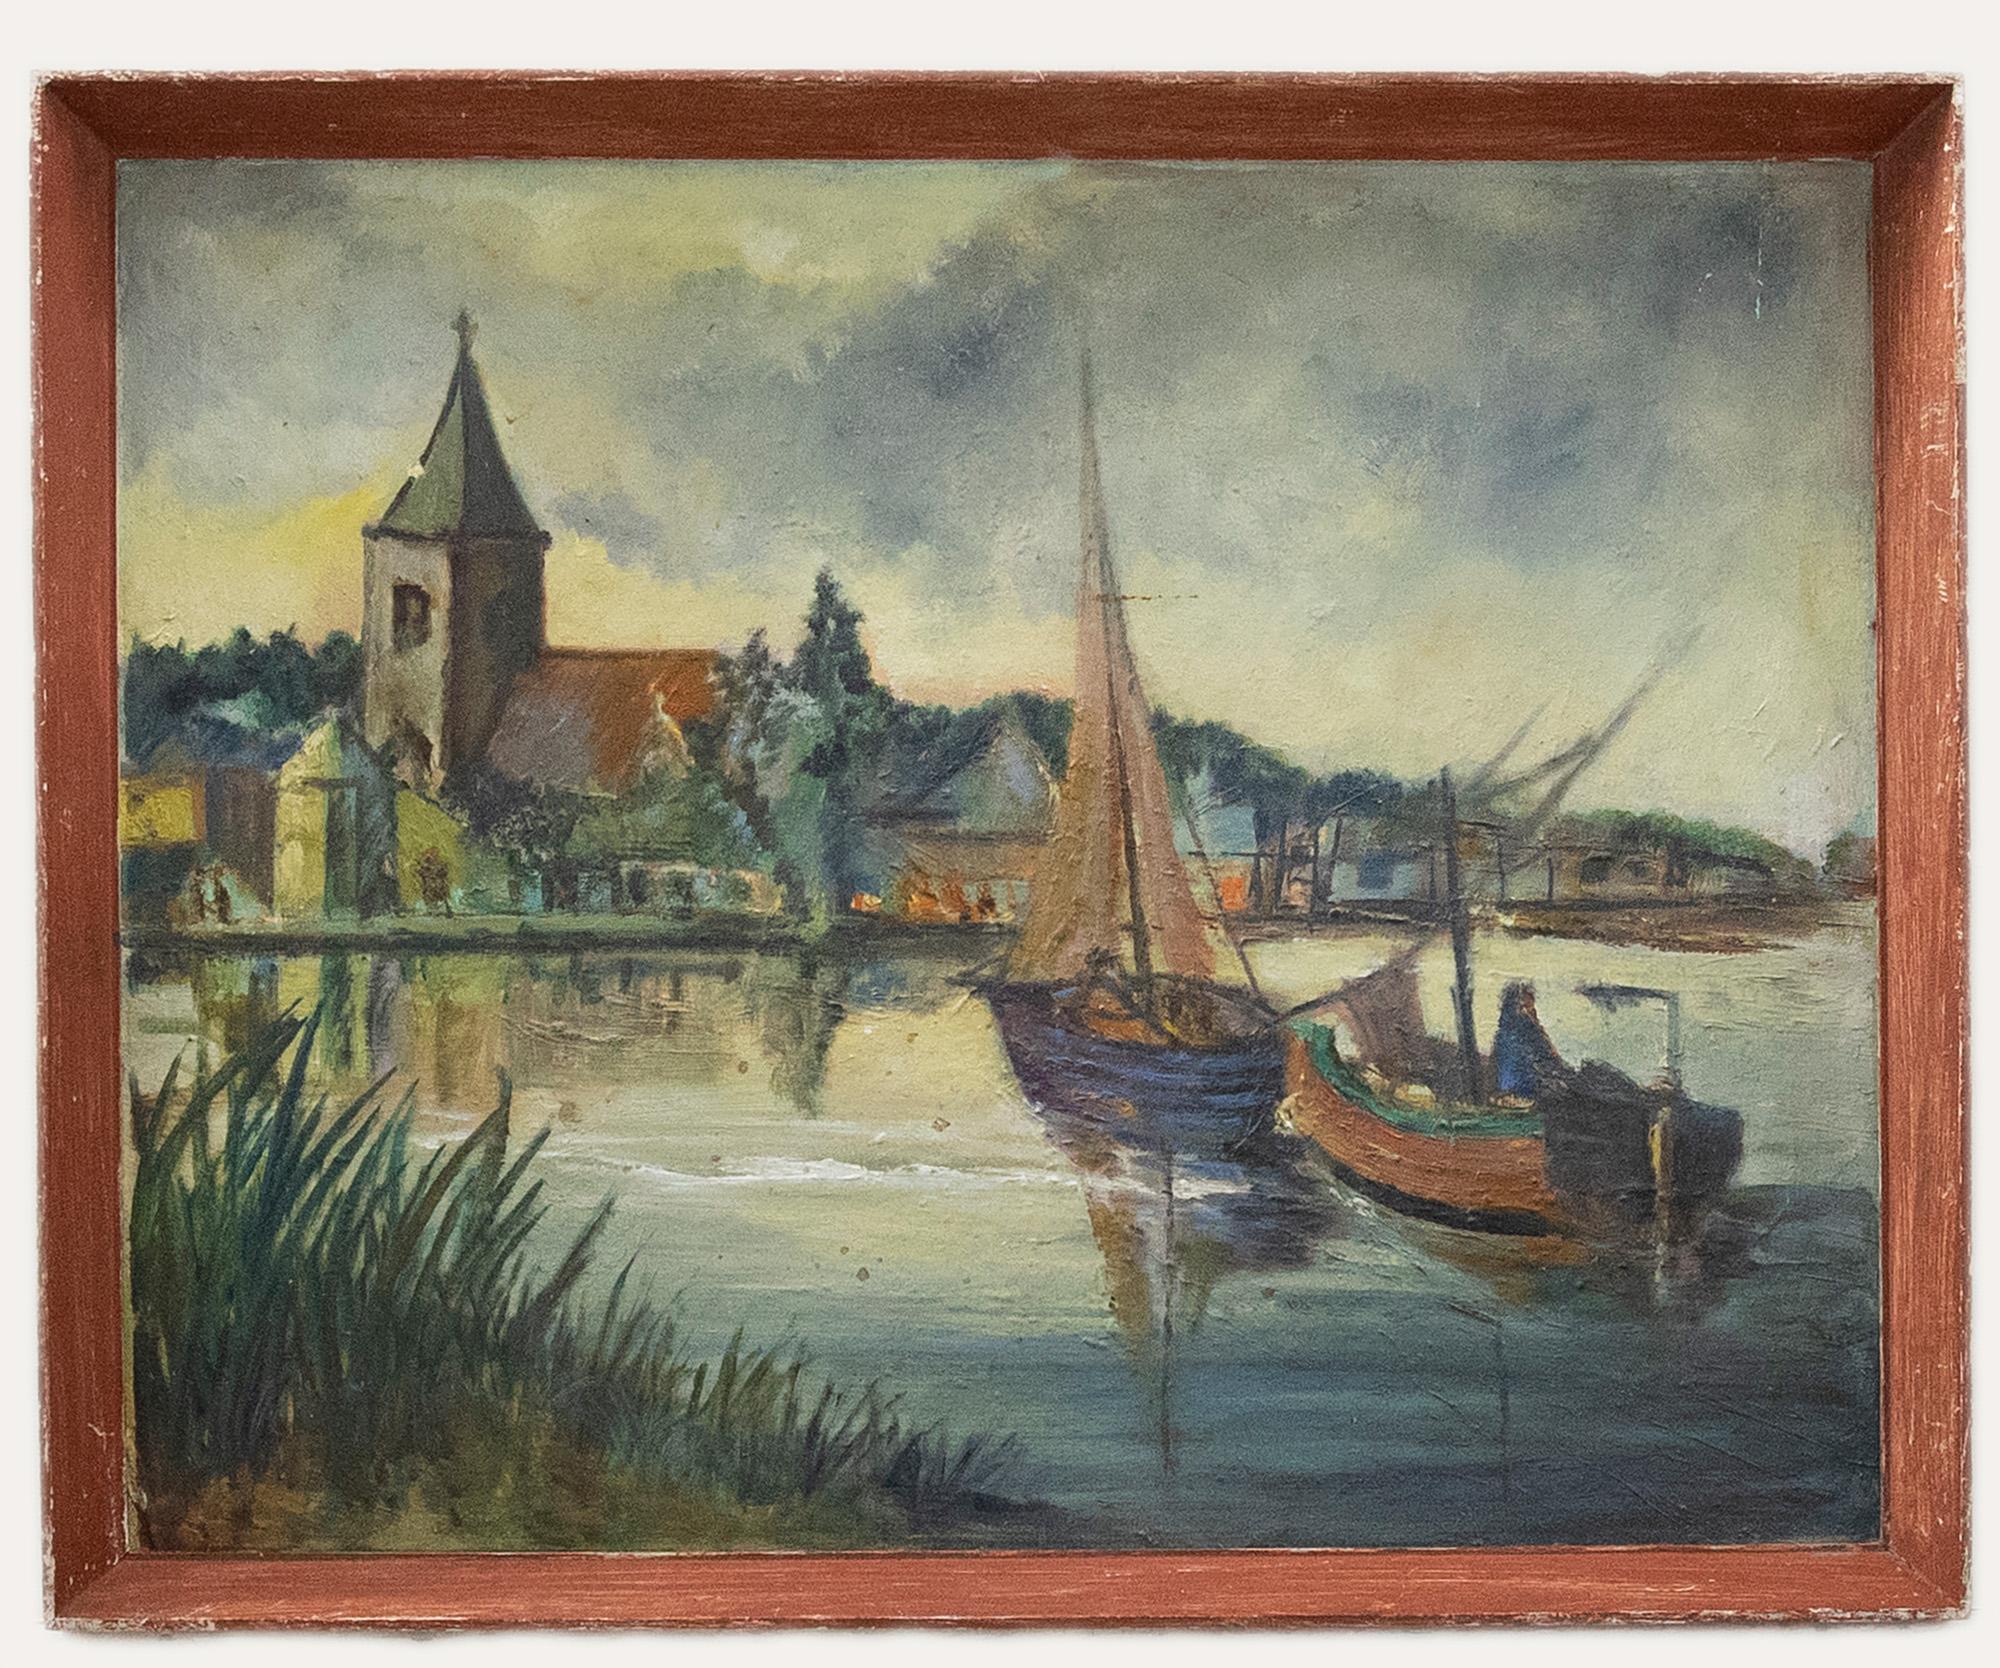 Unknown Landscape Painting - 20th Century Oil - View of Maldon on the River Blackwater